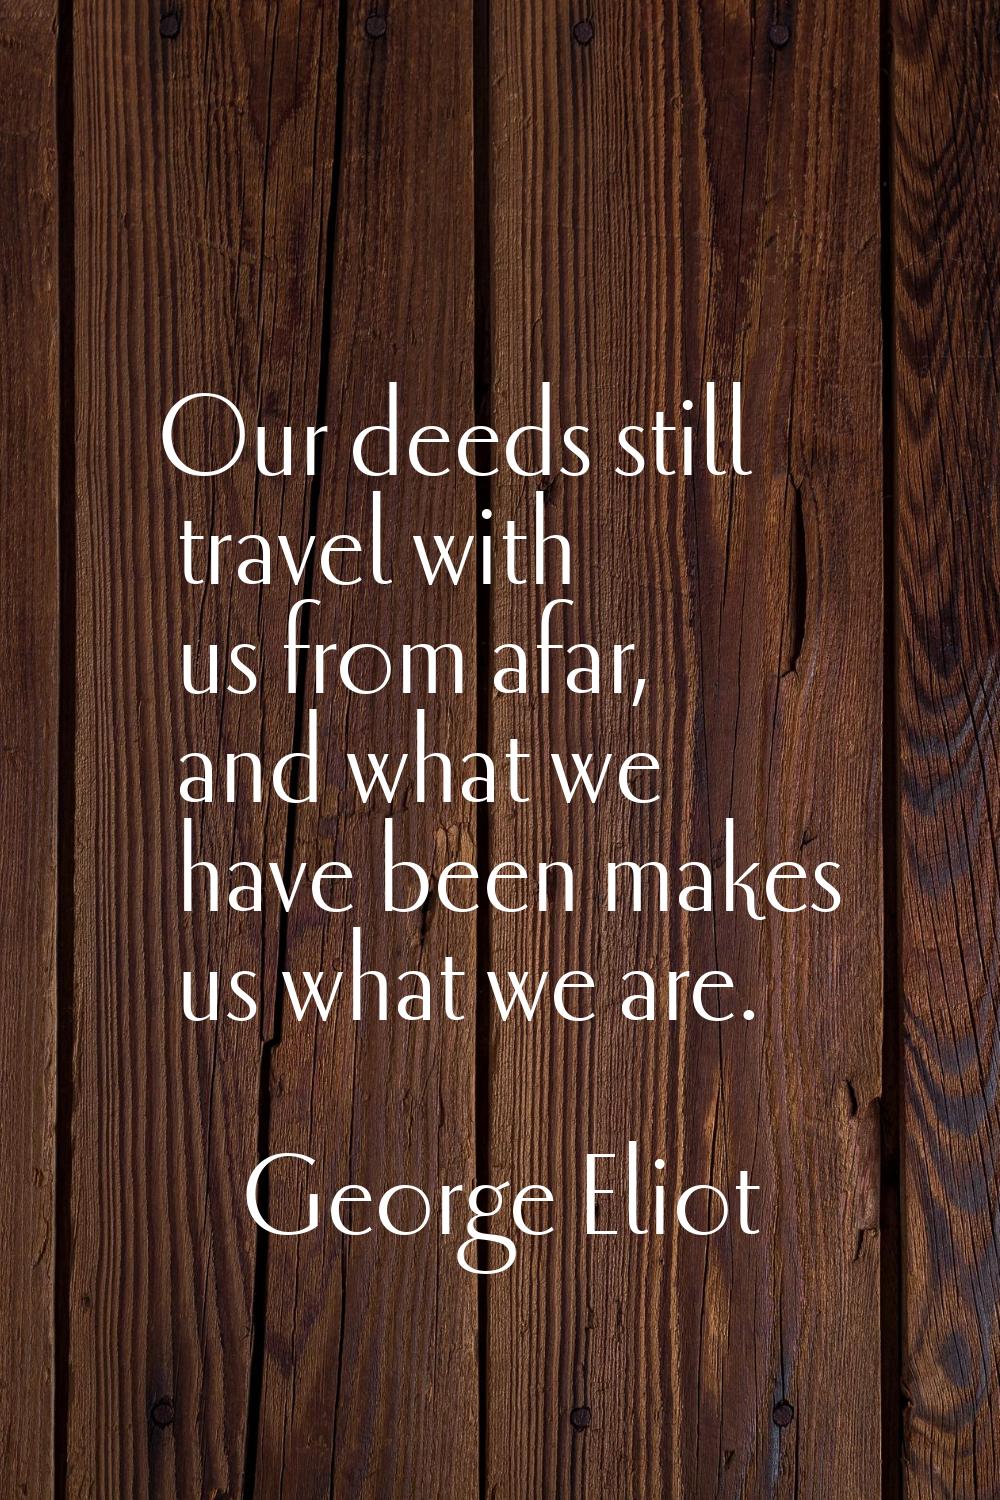 Our deeds still travel with us from afar, and what we have been makes us what we are.